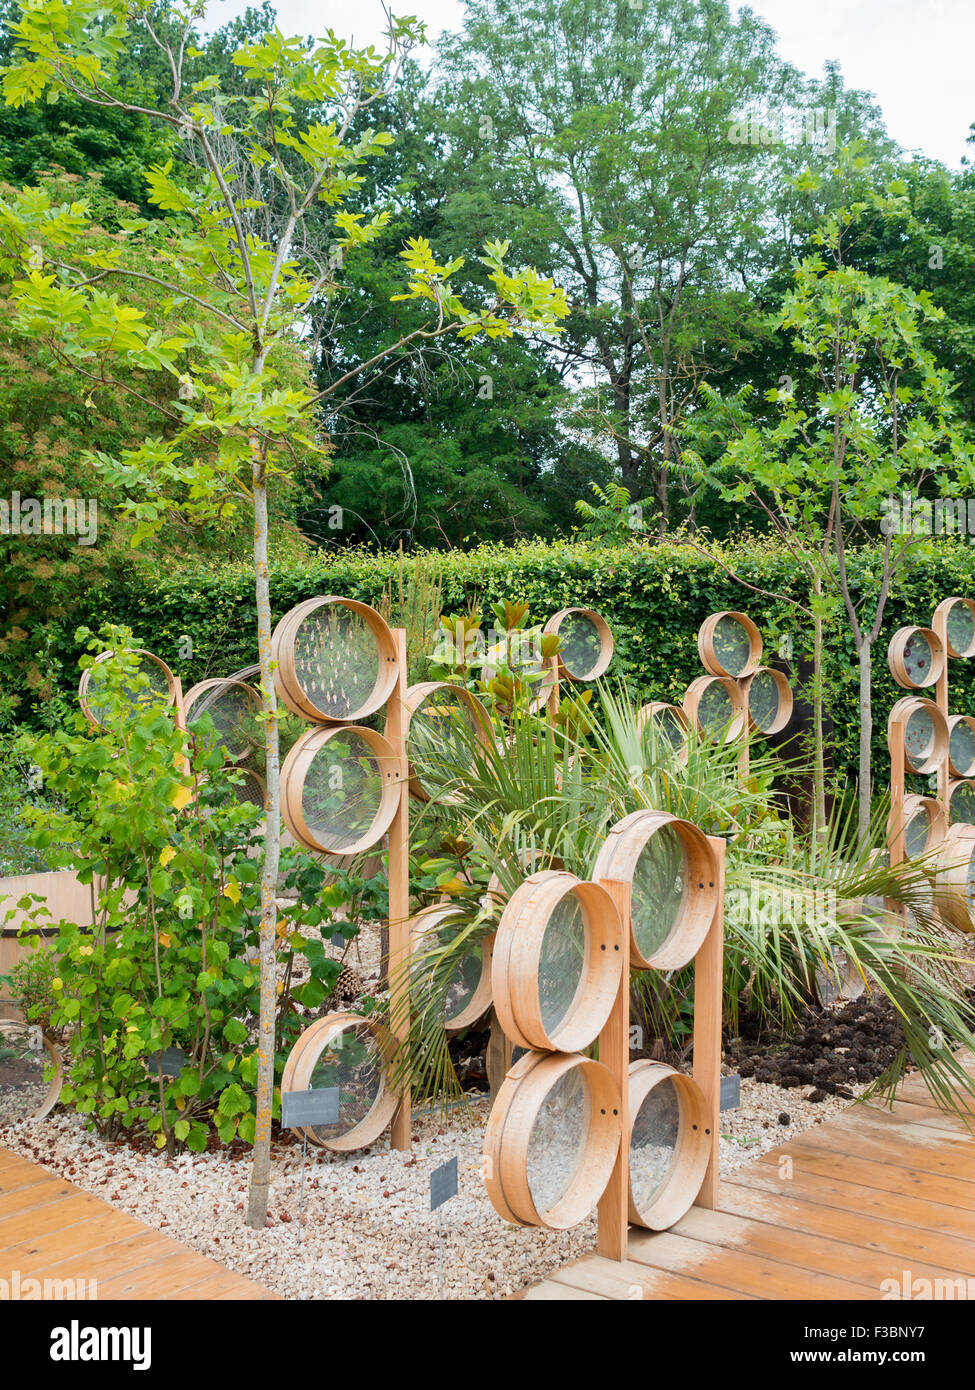 The seed garden at the 2015 International Garden Festival 2015 at the Domain of Chaumont-sur-Loire Stock Photo